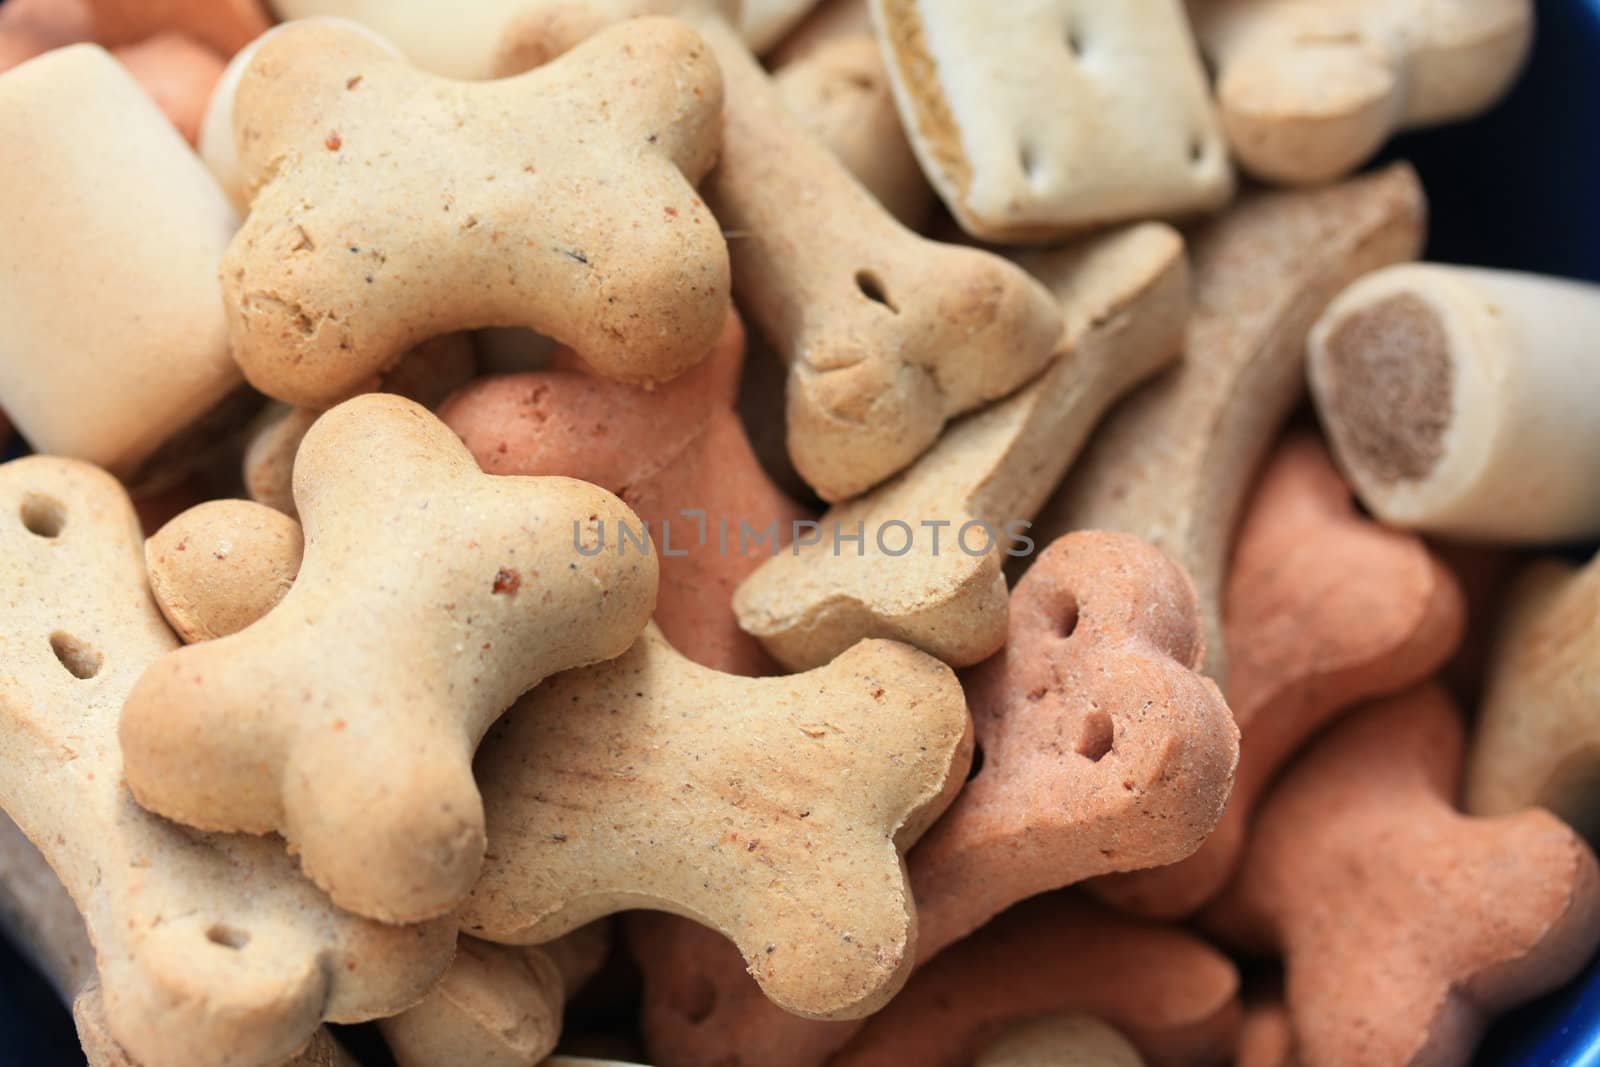 Crunchy dog cookies or biscuits in different shapes and colors and maybe tastes too...